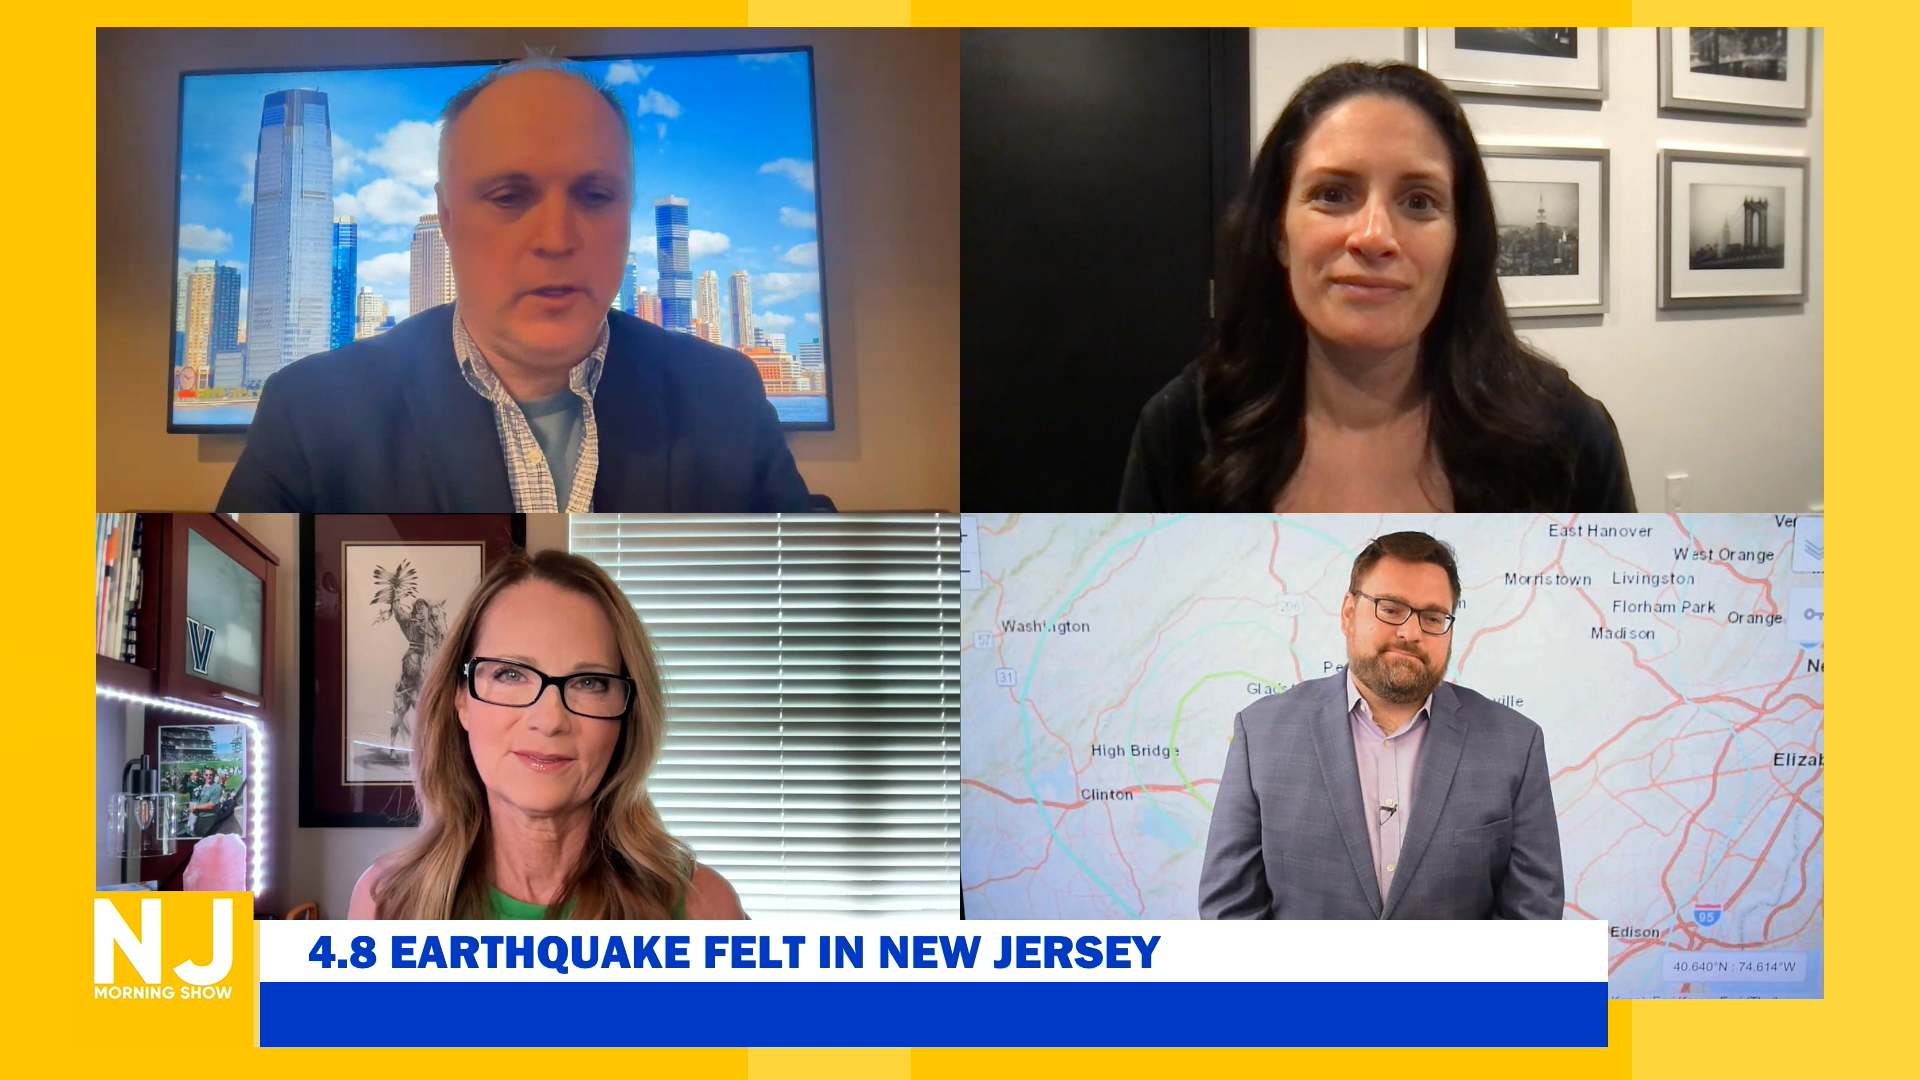 ONNJ’s New Jersey Earthquake Coverage